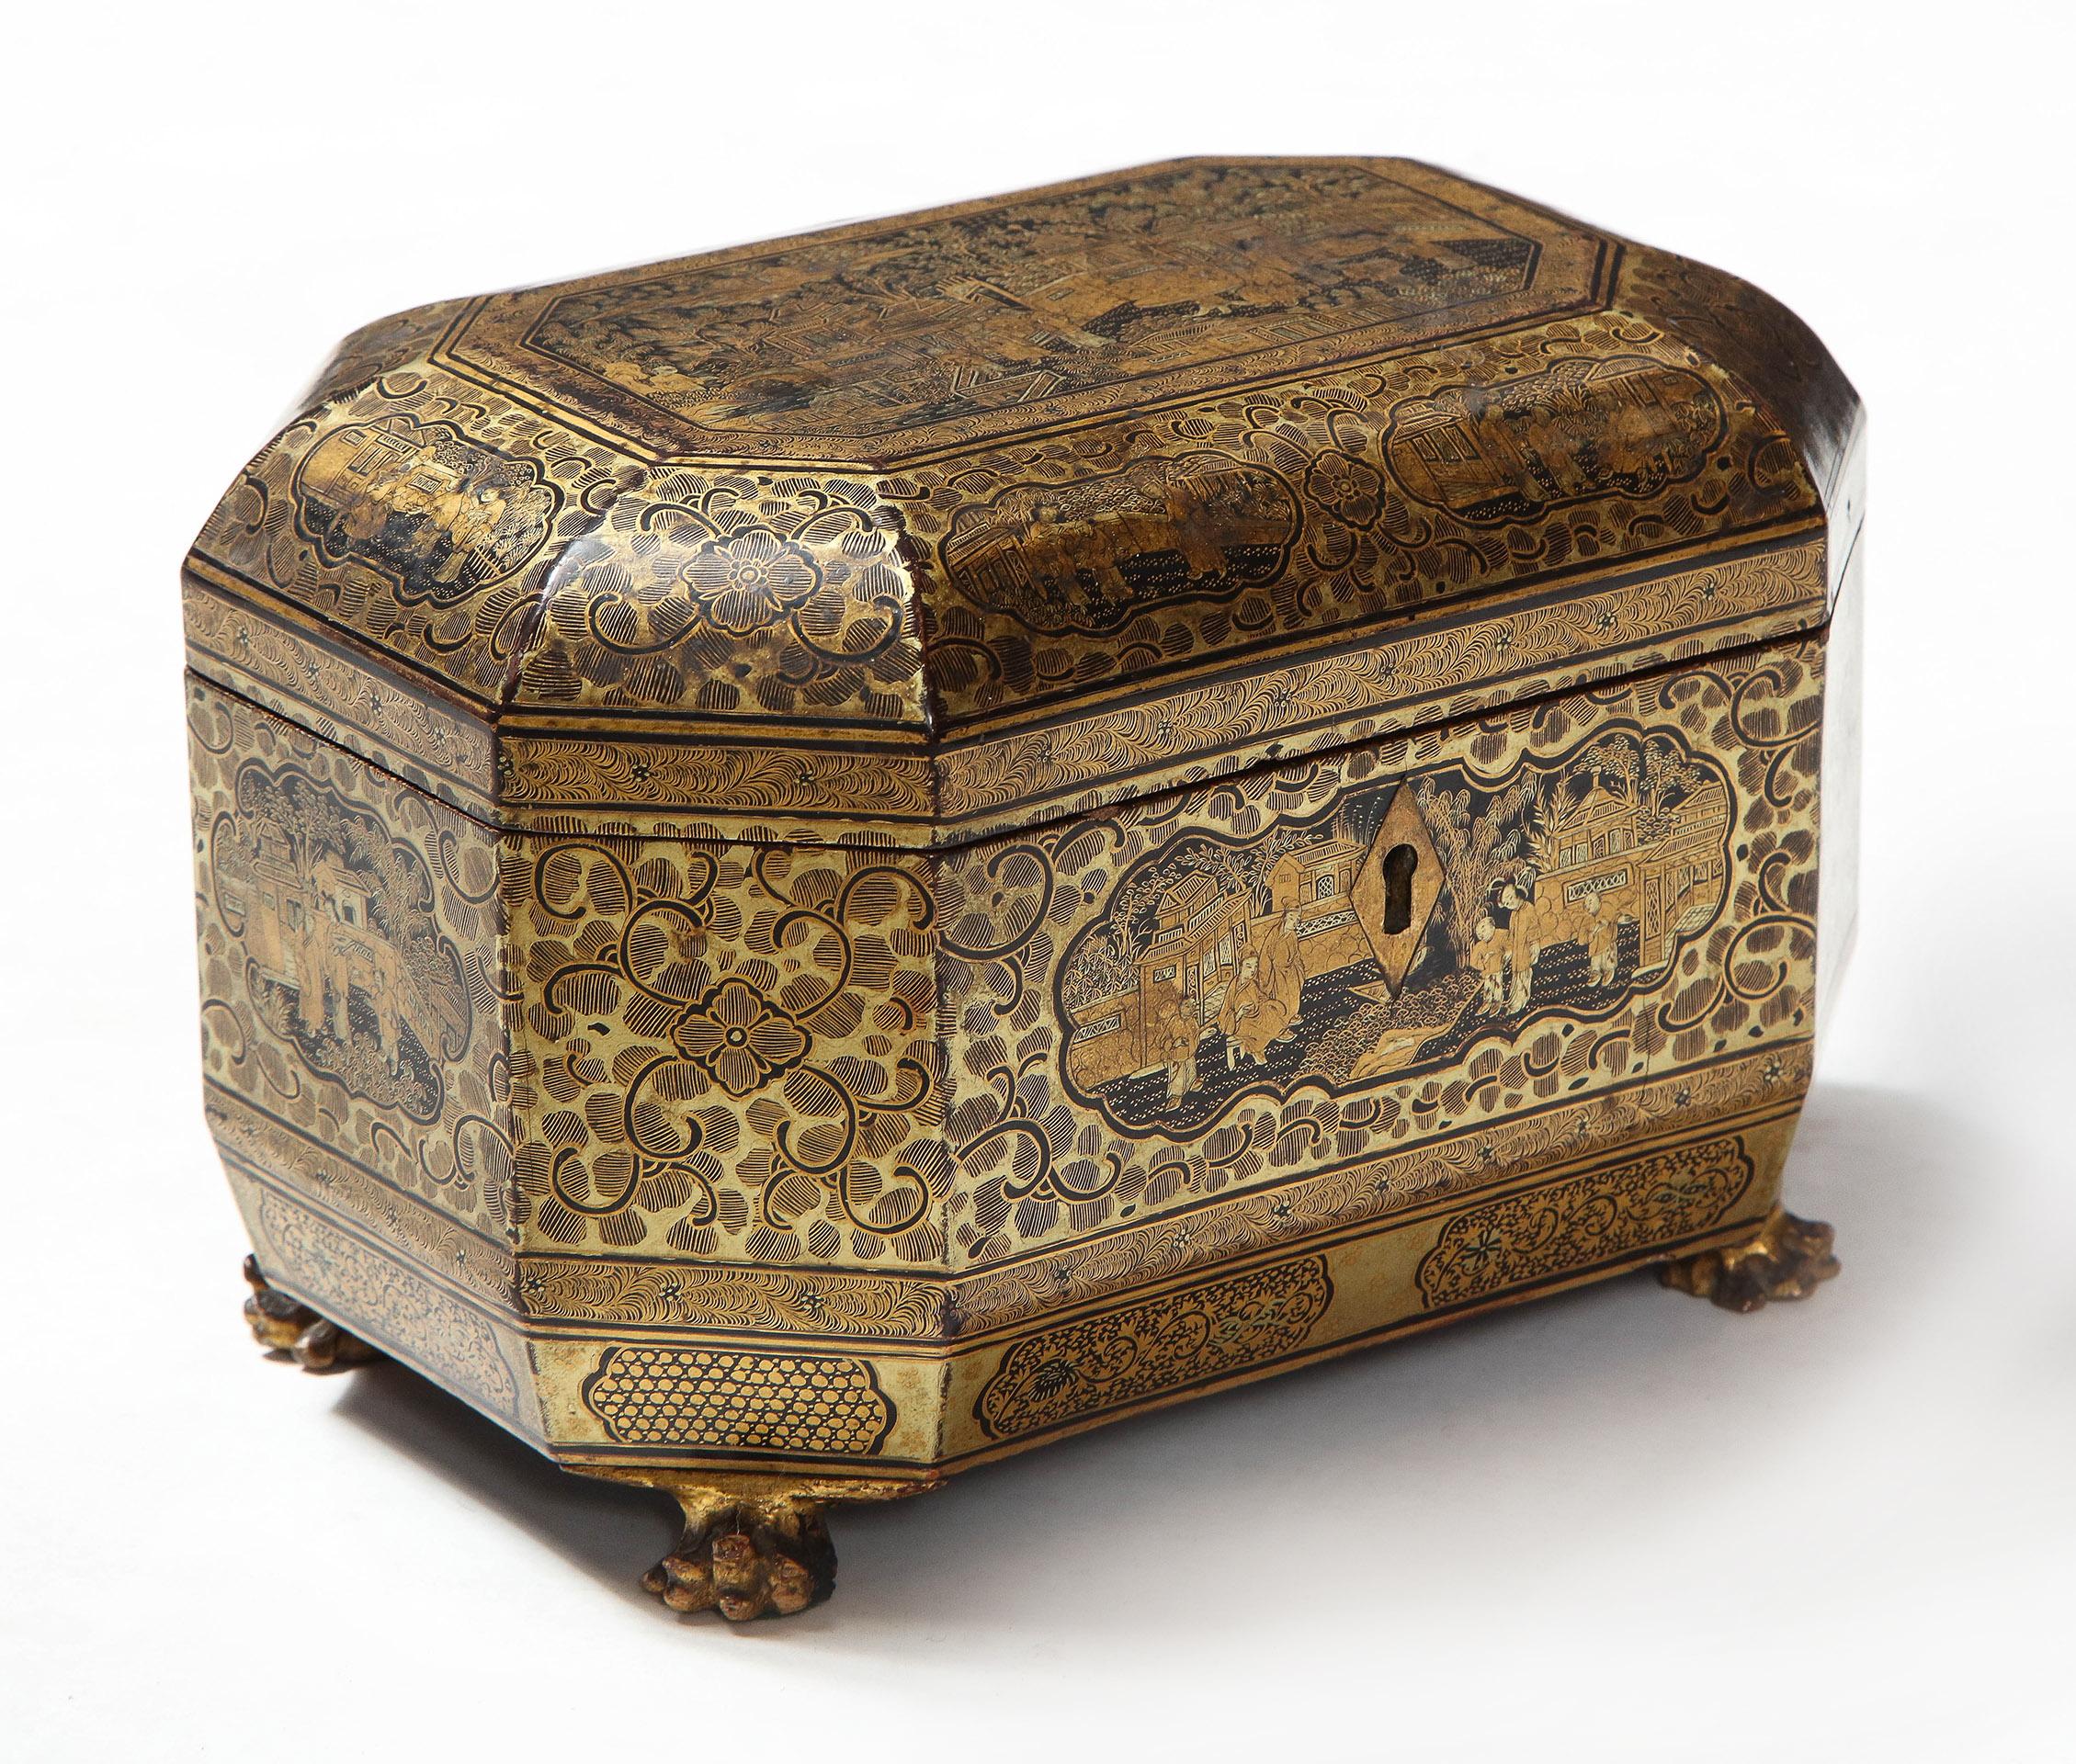 Gilt lacquer Chinese tea caddy

Chinese export lacquer tea caddy on dragon feet from the Qing dynasty. Octagonal form with hinged lid, divided interior with pewter caddies.